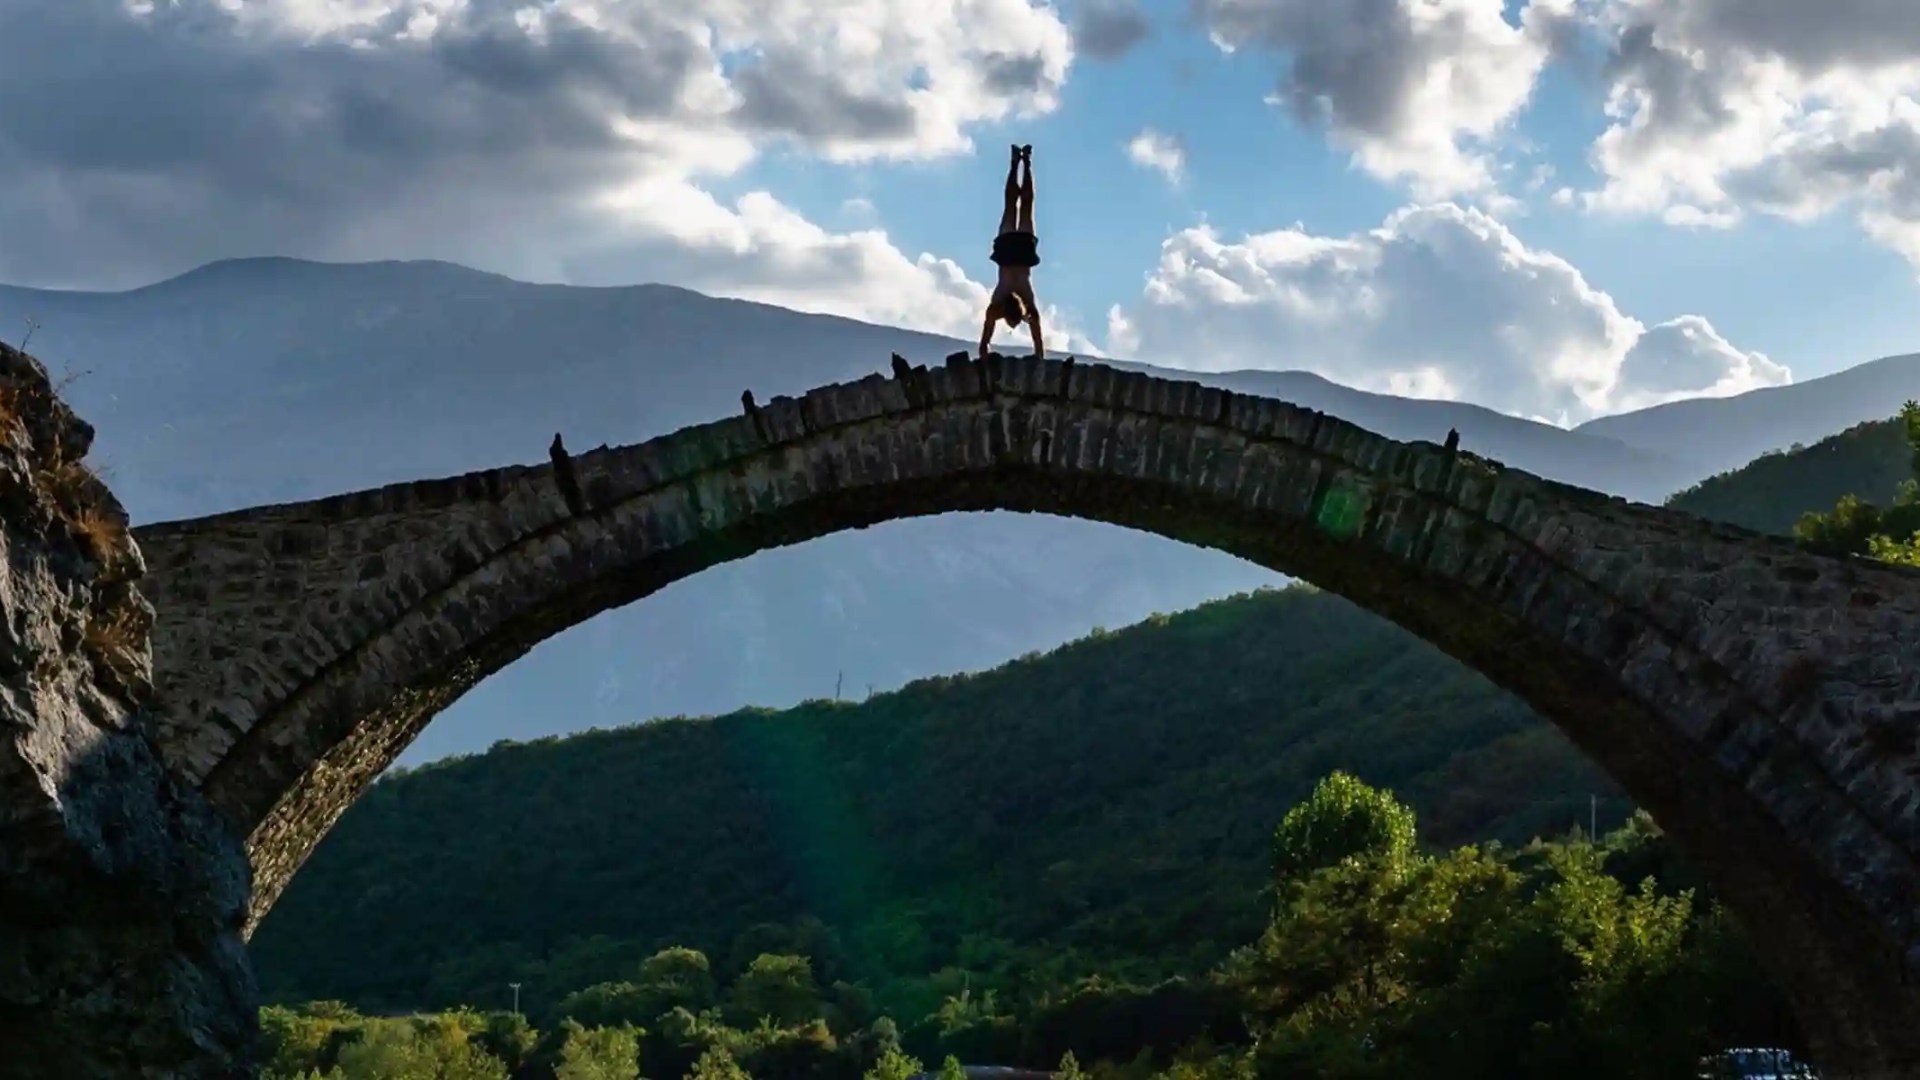 a person does a handstand on a bridge